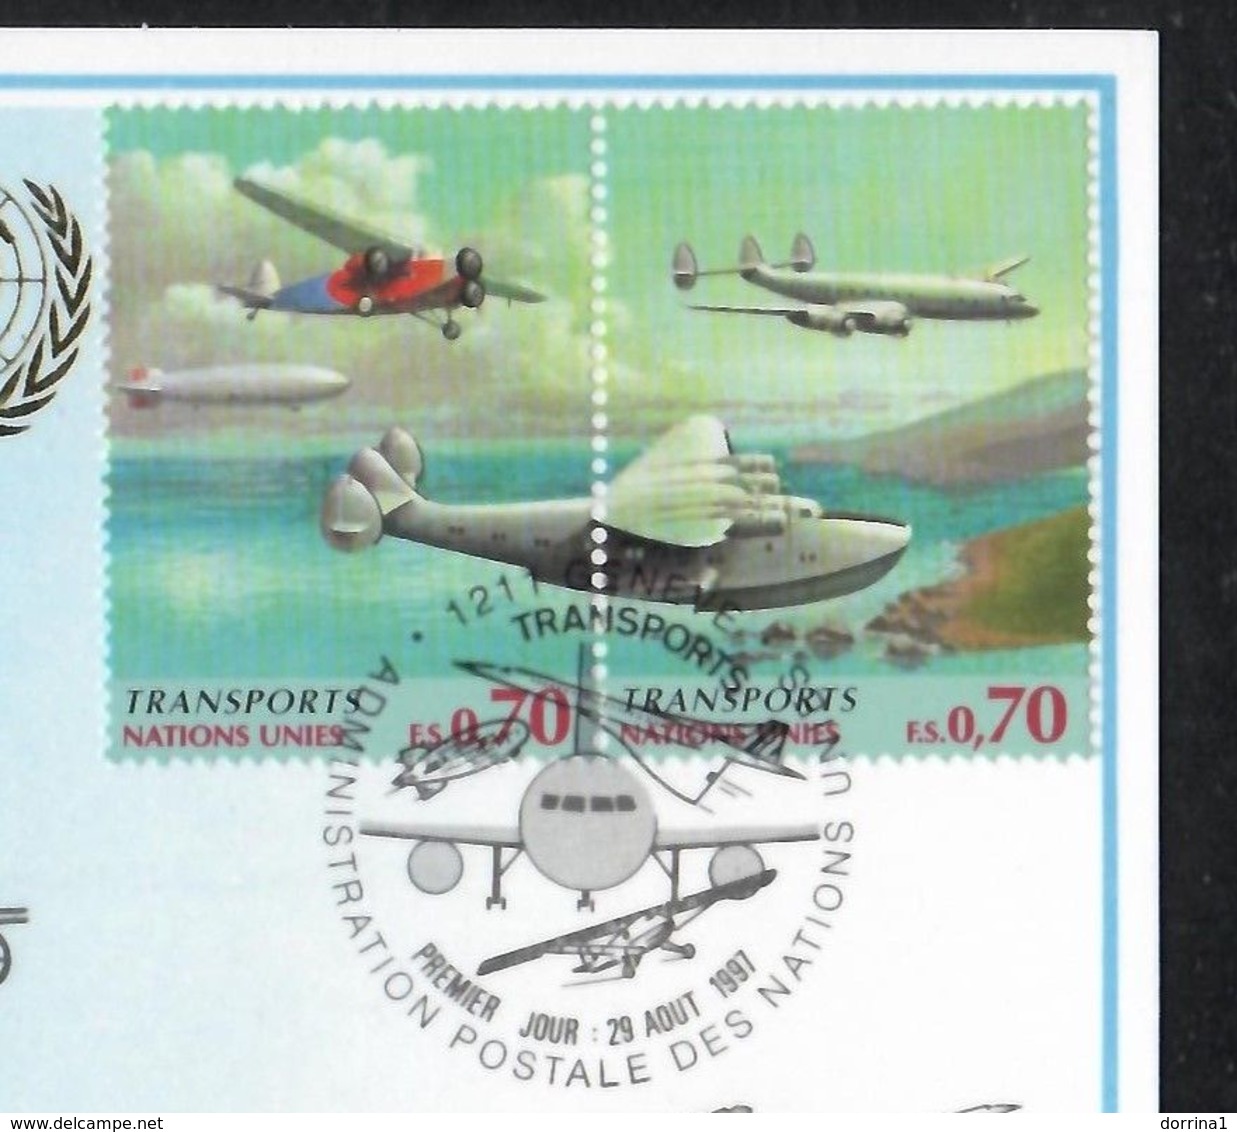 UN United Nations RICCIONE 1997 TRANSPORTS Airplane Aircraft - Italy Geneva - Covers & Documents